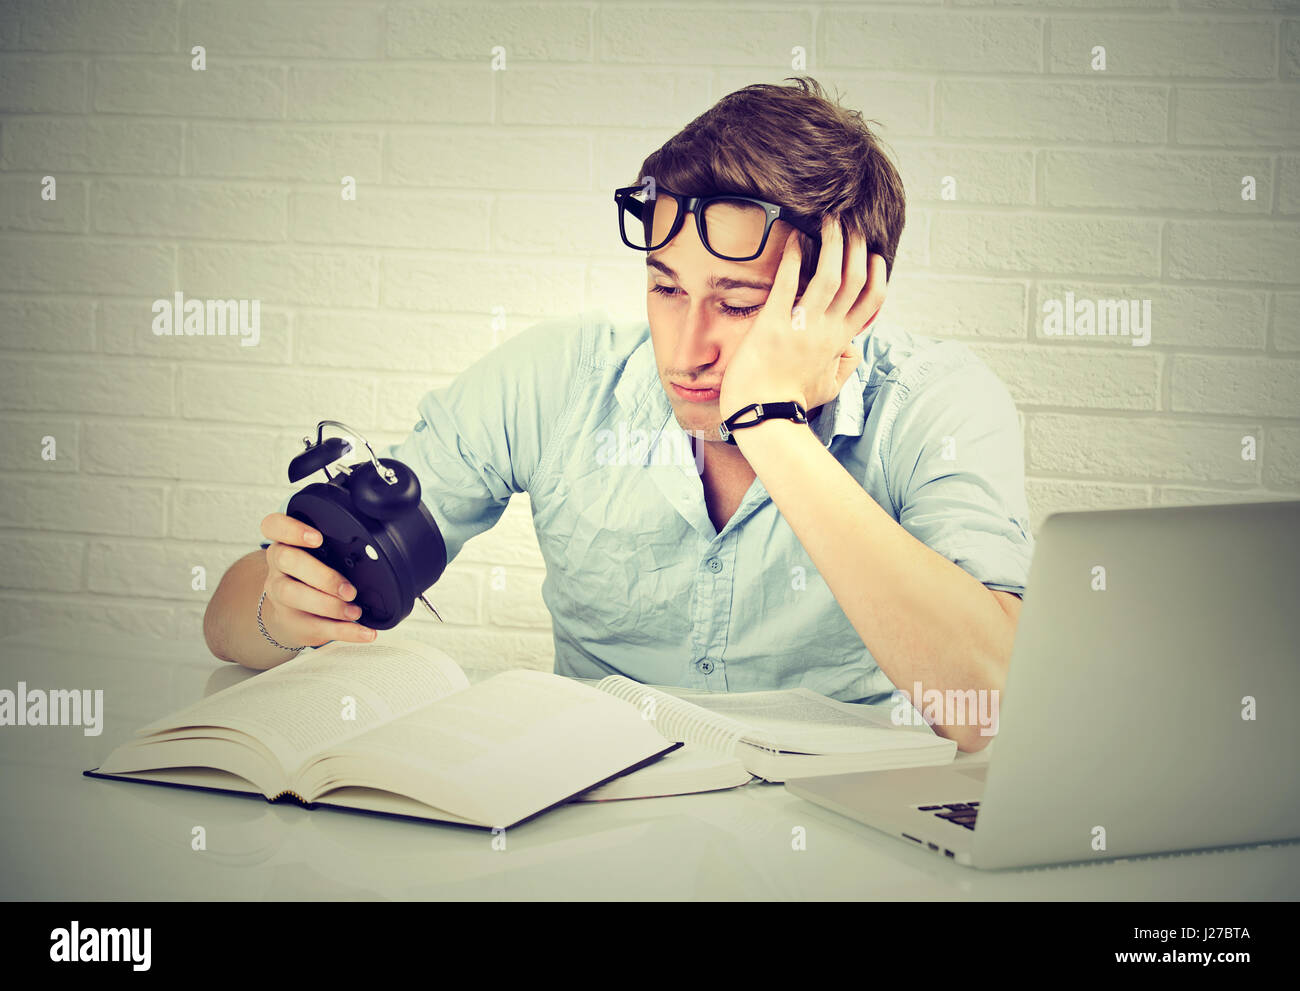 Long studying hours sleep deprivation concept. Tired sleepy young man sitting at desk with book in front of laptop computer looking at alarm clock Stock Photo